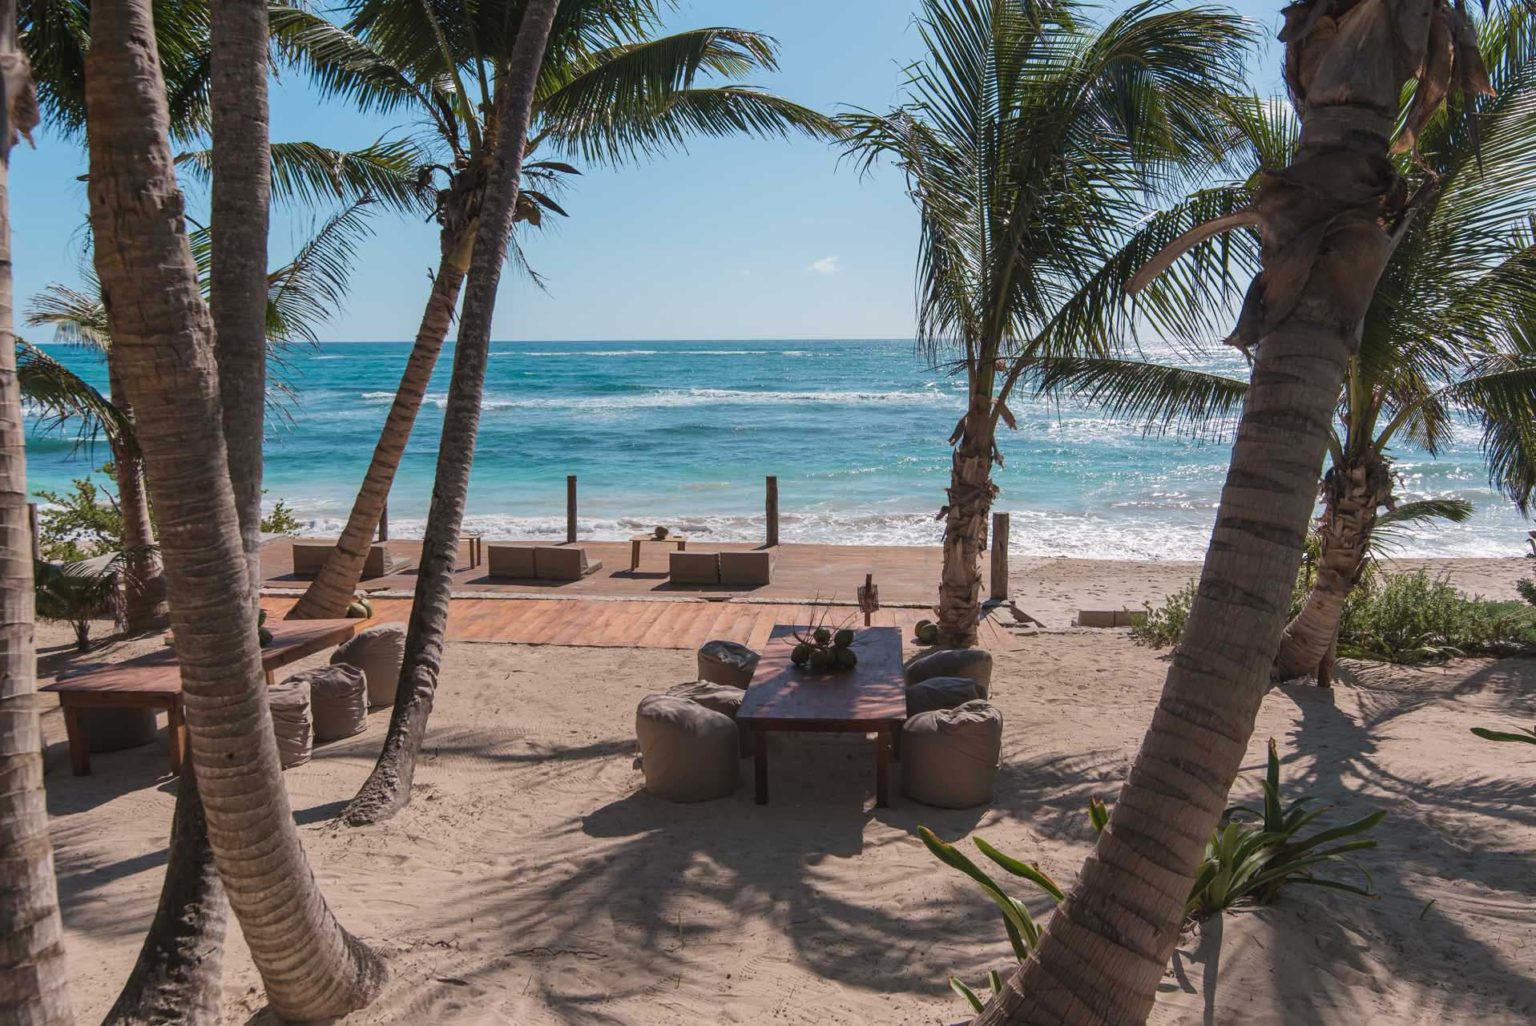 Outdoor tables and chairs in the sand on the beach at Roca Restaurant | Papaya Playa Project